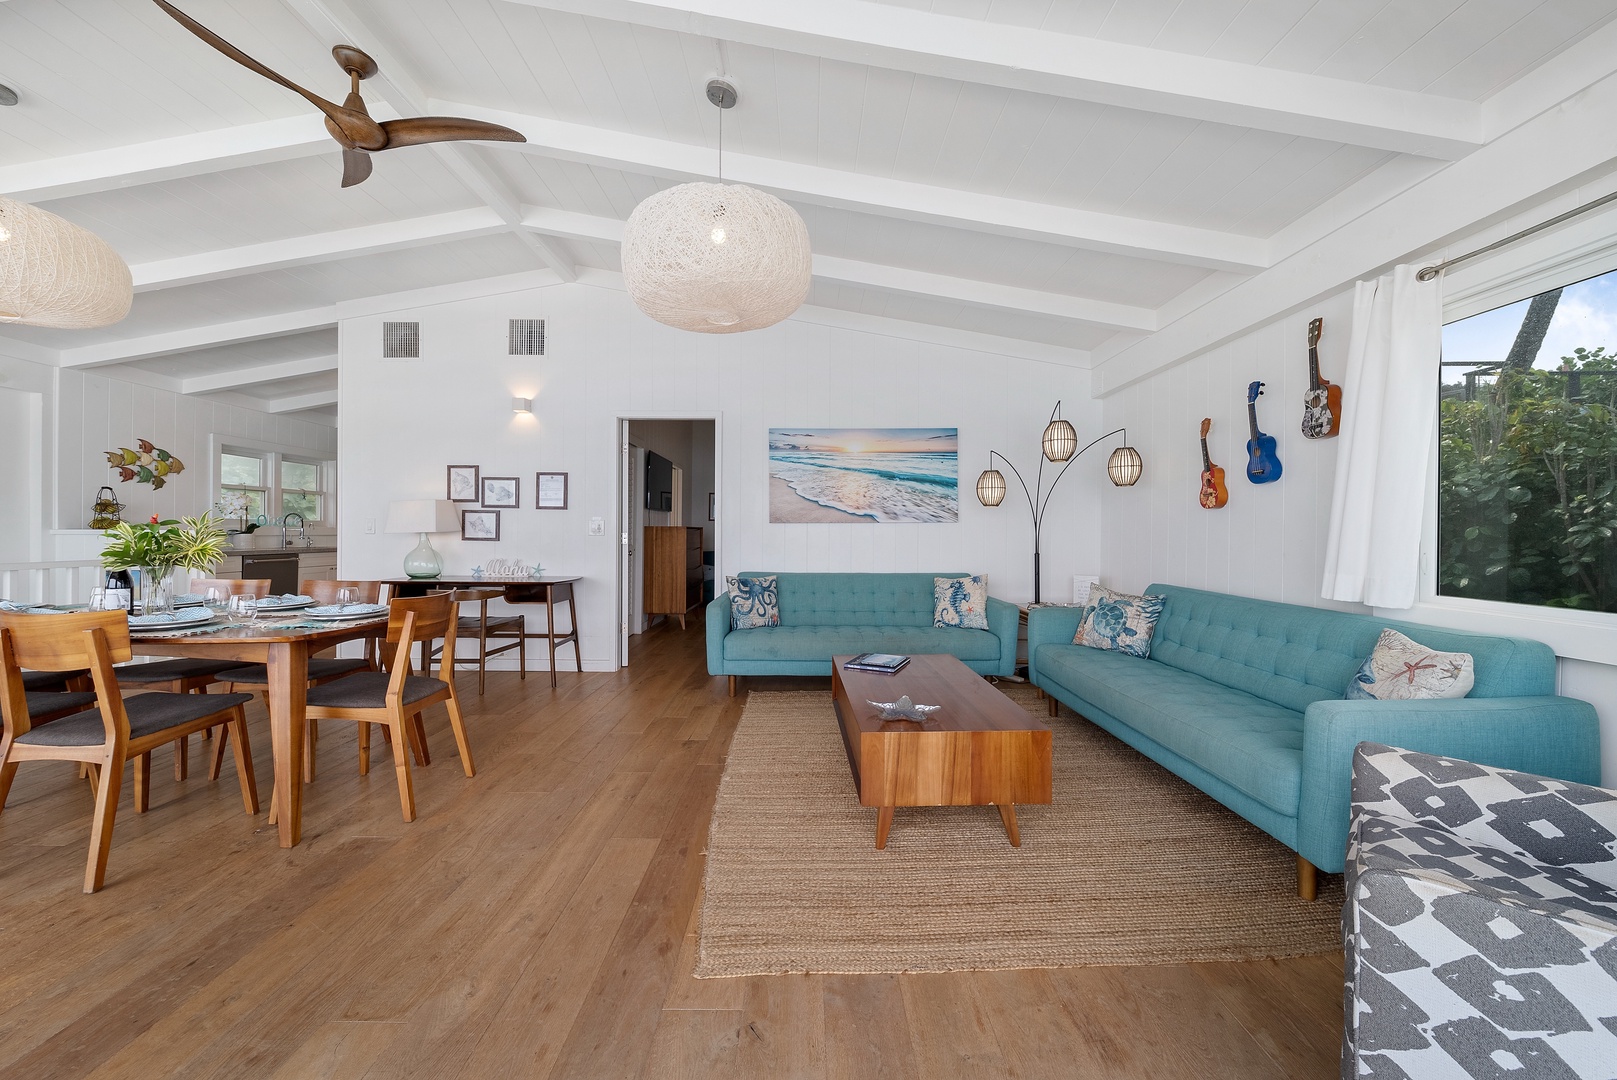 Haleiwa Vacation Rentals, Surfer's Paradise - Just off the living and dining areas, you'll find the primary bedroom